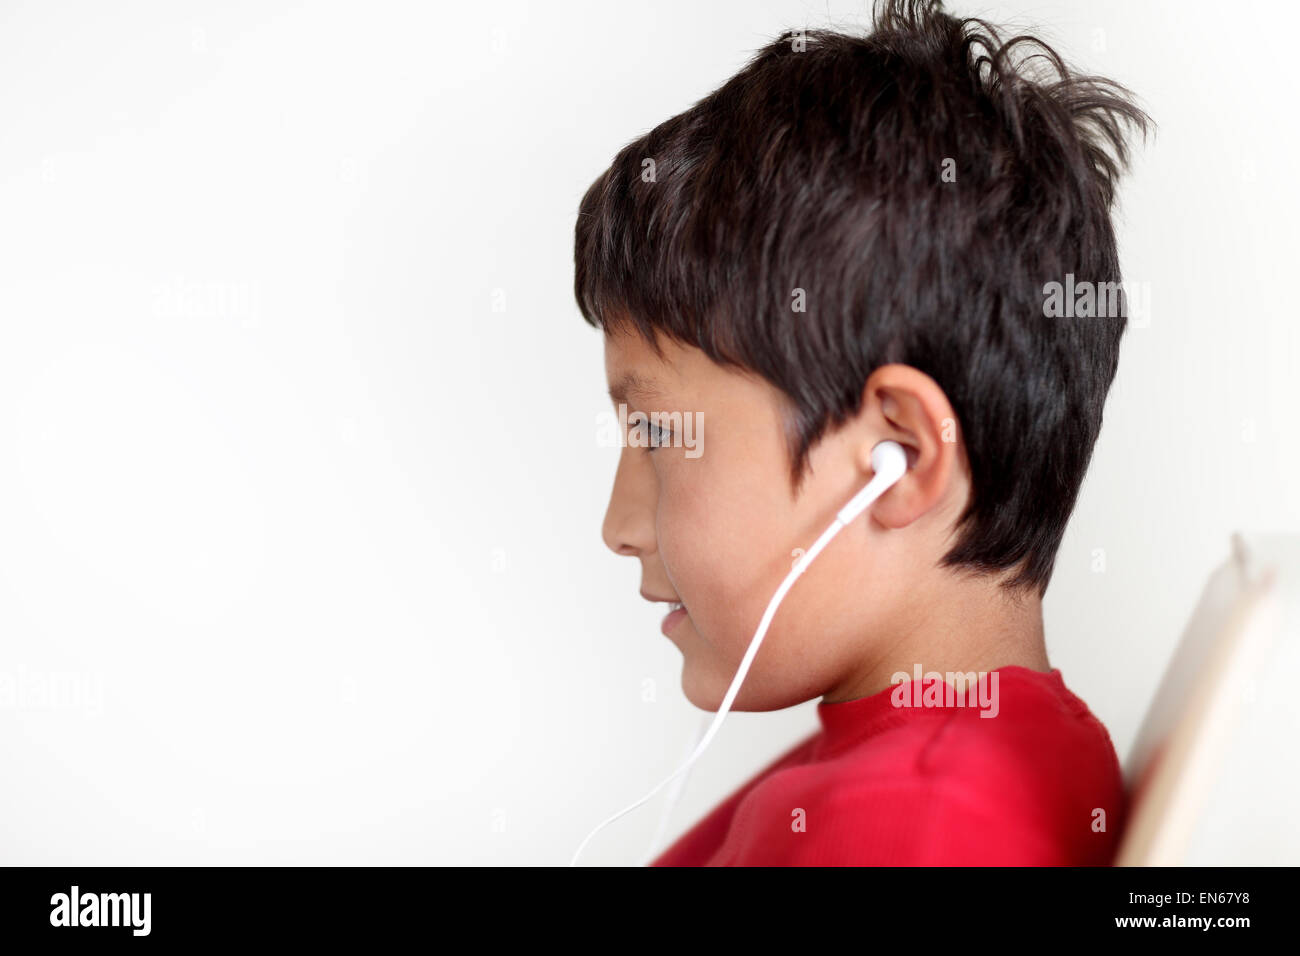 Profile of young boy with earphones on light background Stock Photo